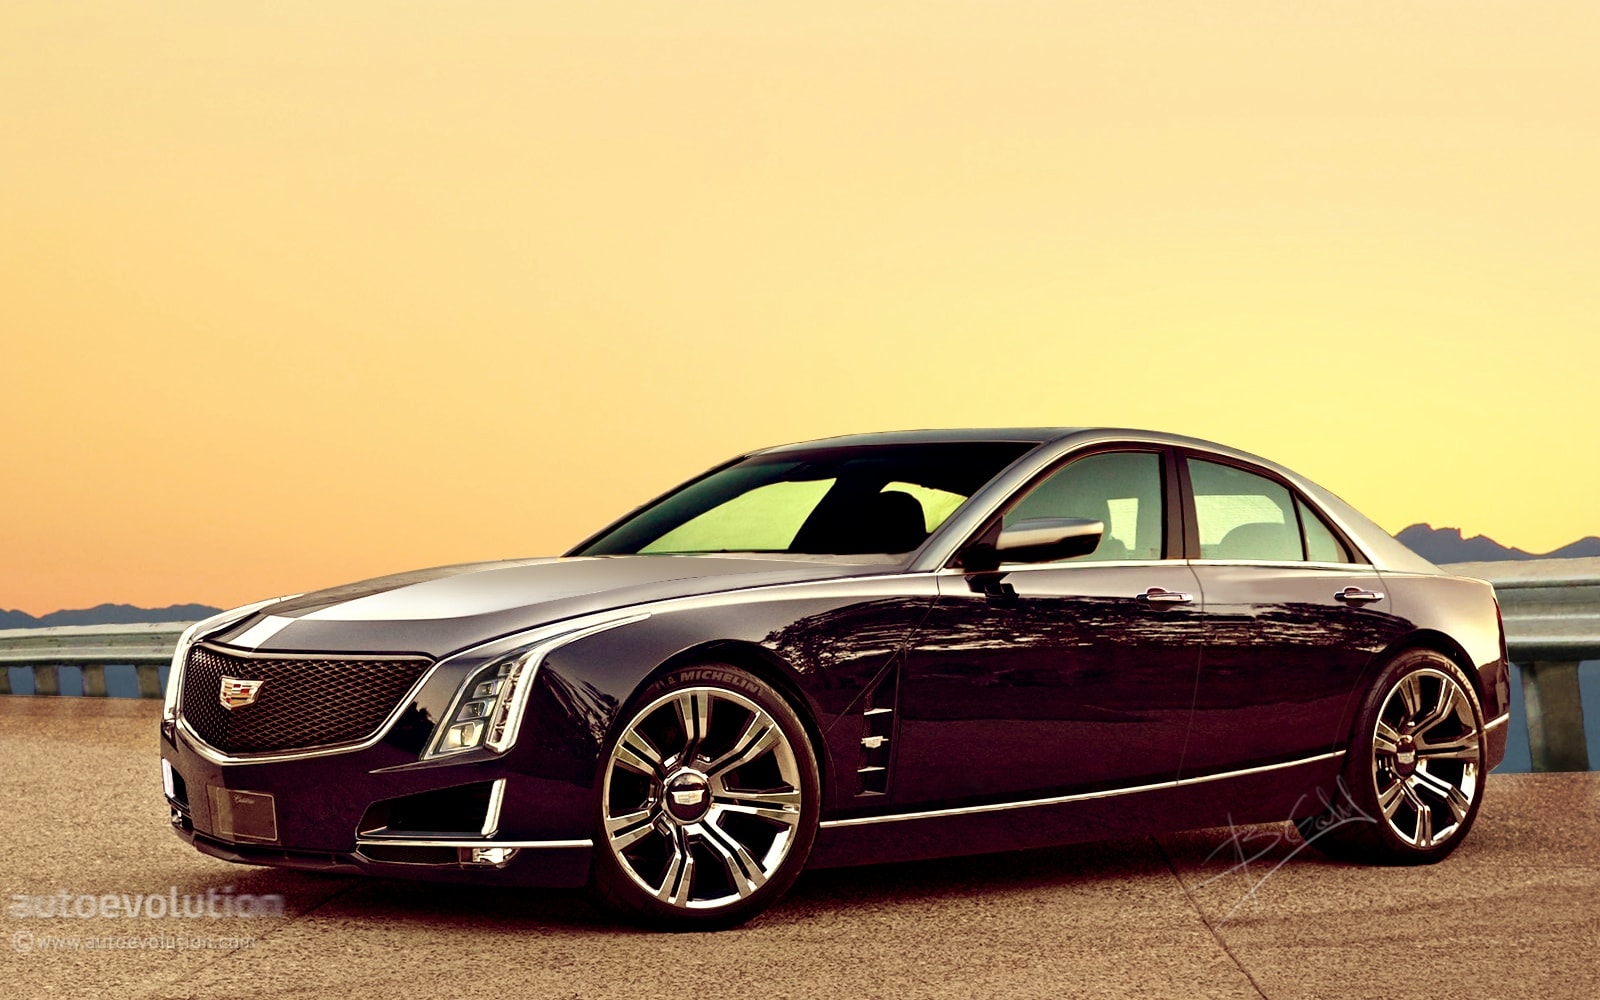 http://s1.cdn.autoevolution.com/images/news/2016-cadillac-ct6-featured-on-the-automakers-website-89065_1.jpg